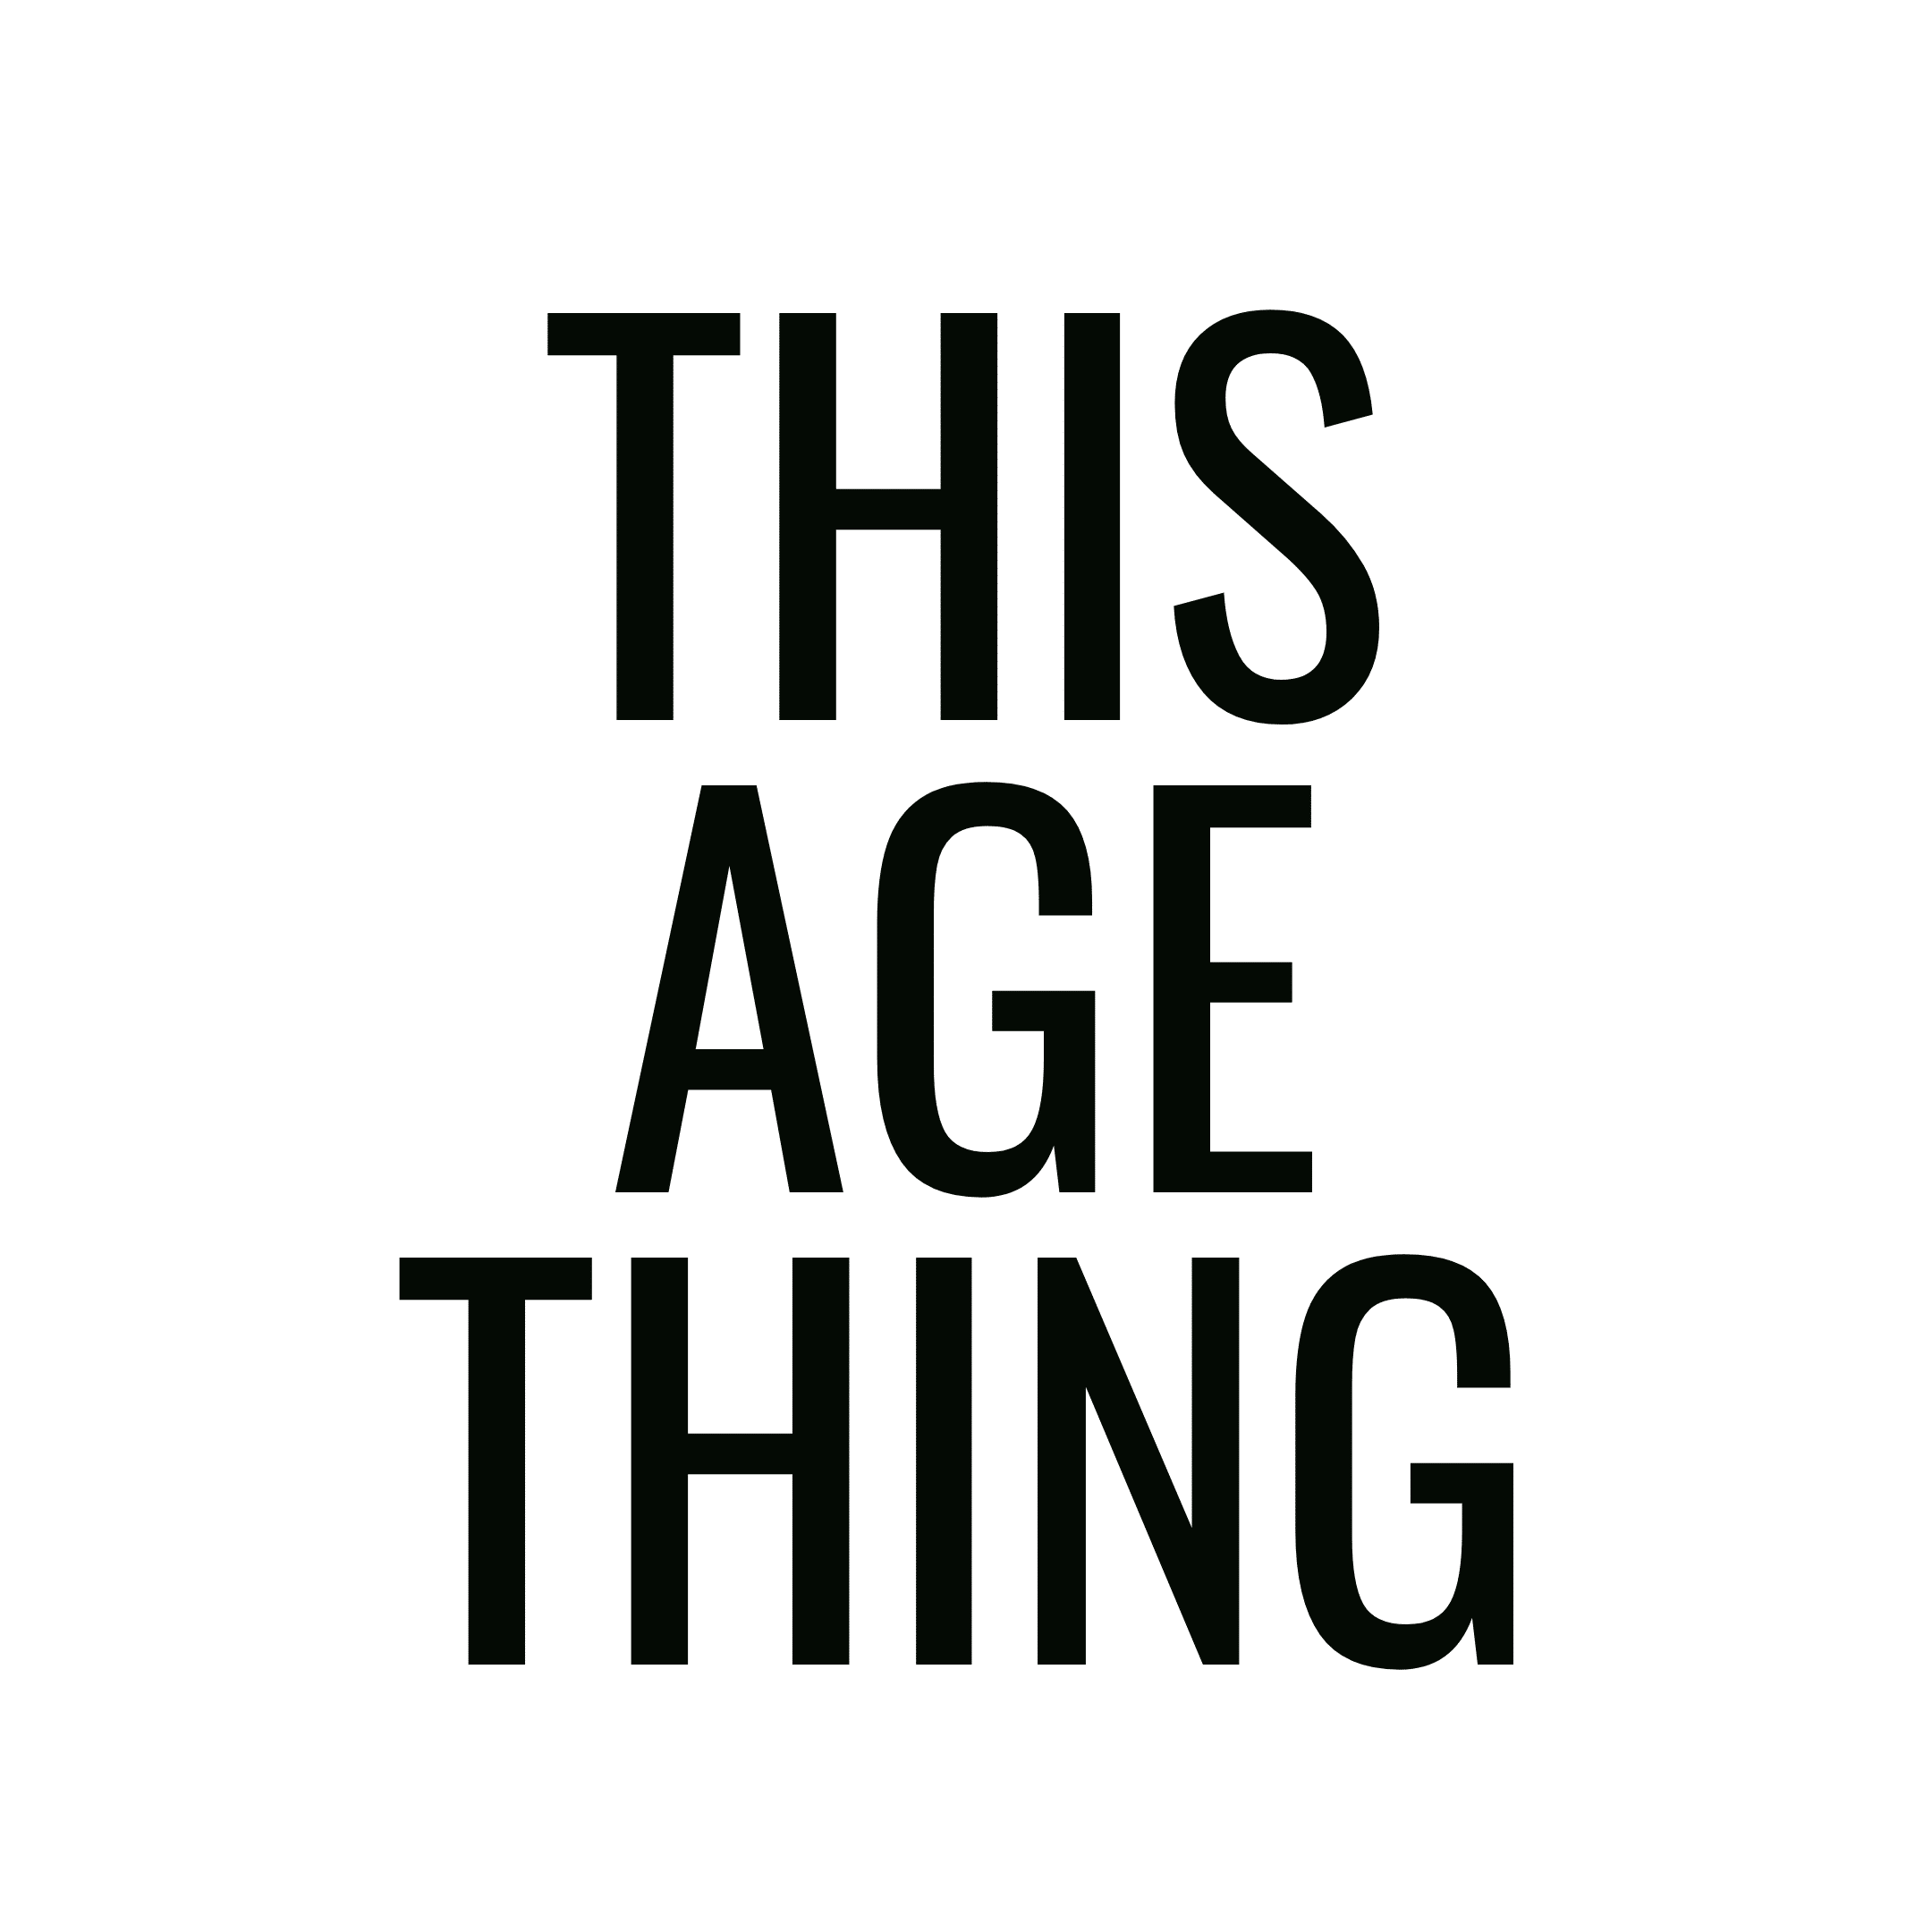 https://thisagething.co/wp-content/uploads/2023/03/7.png